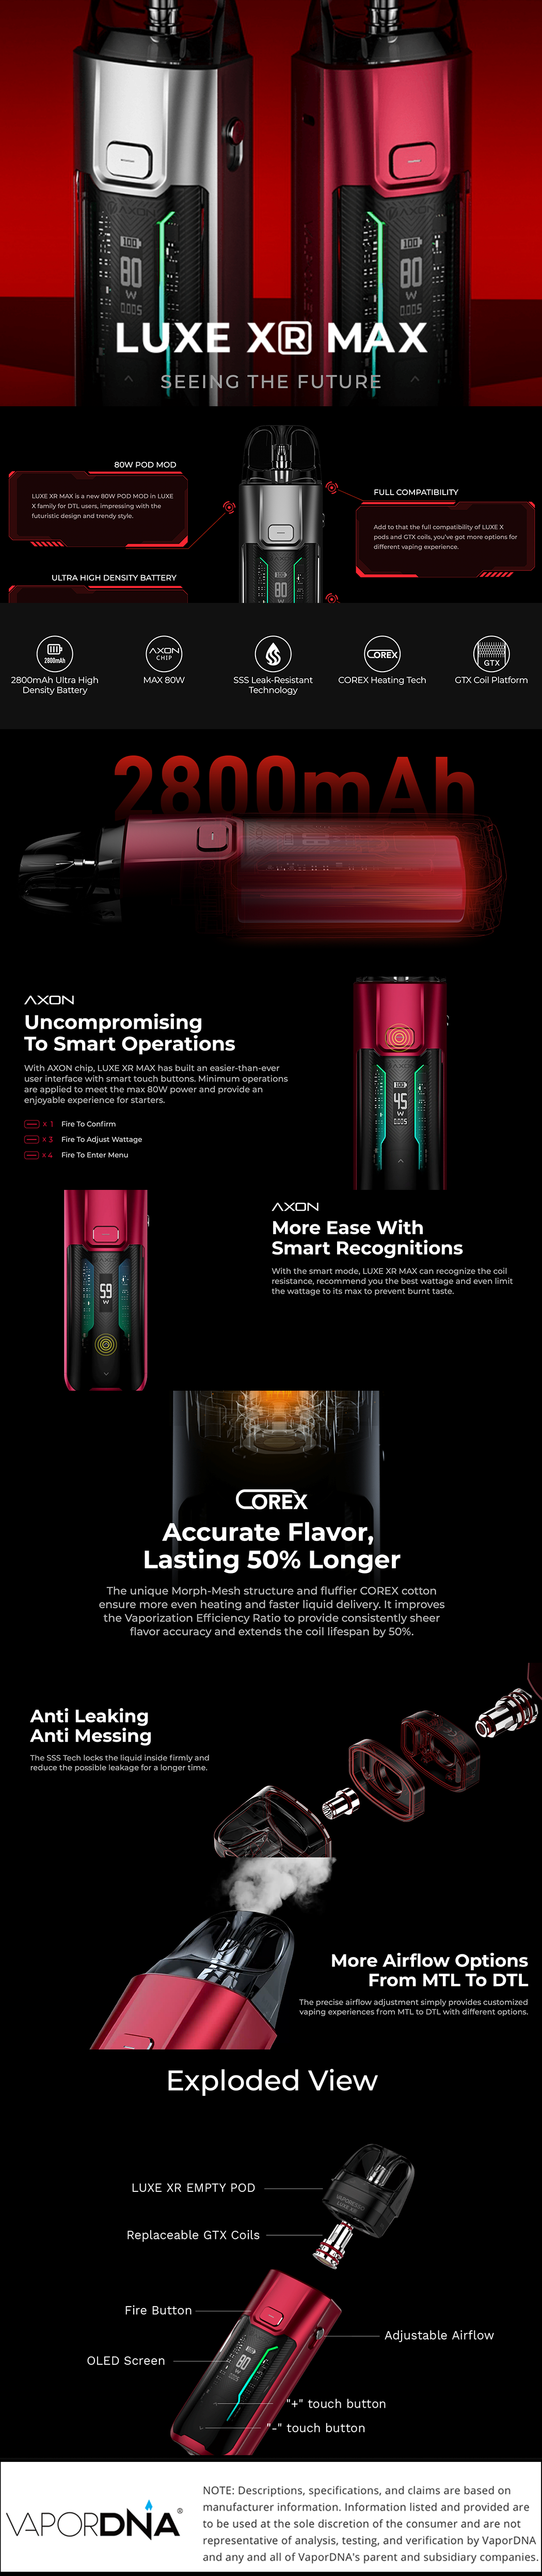 Vaporesso LUXE XR MAX Infographic